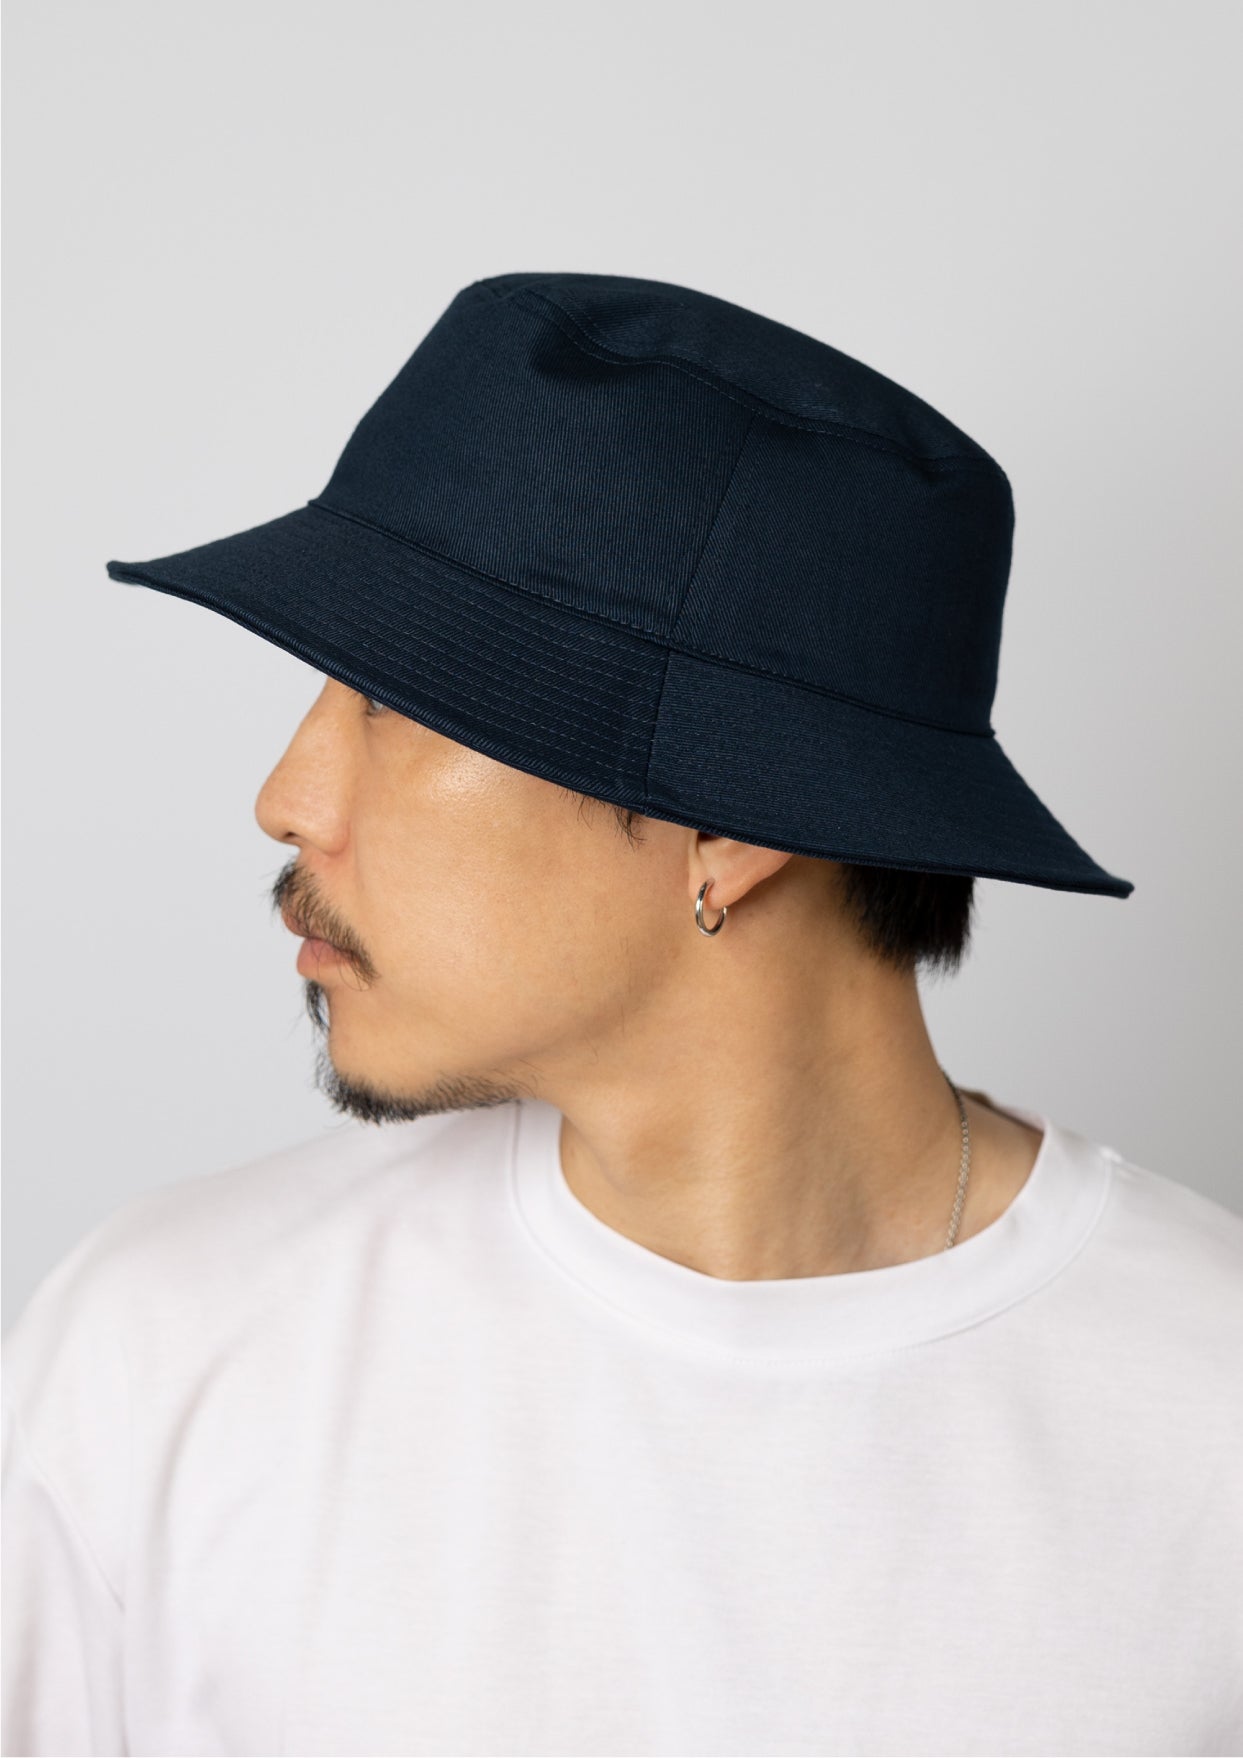 UNNAMED HEADWEAR 【BUCKET / NVY】バケットハット